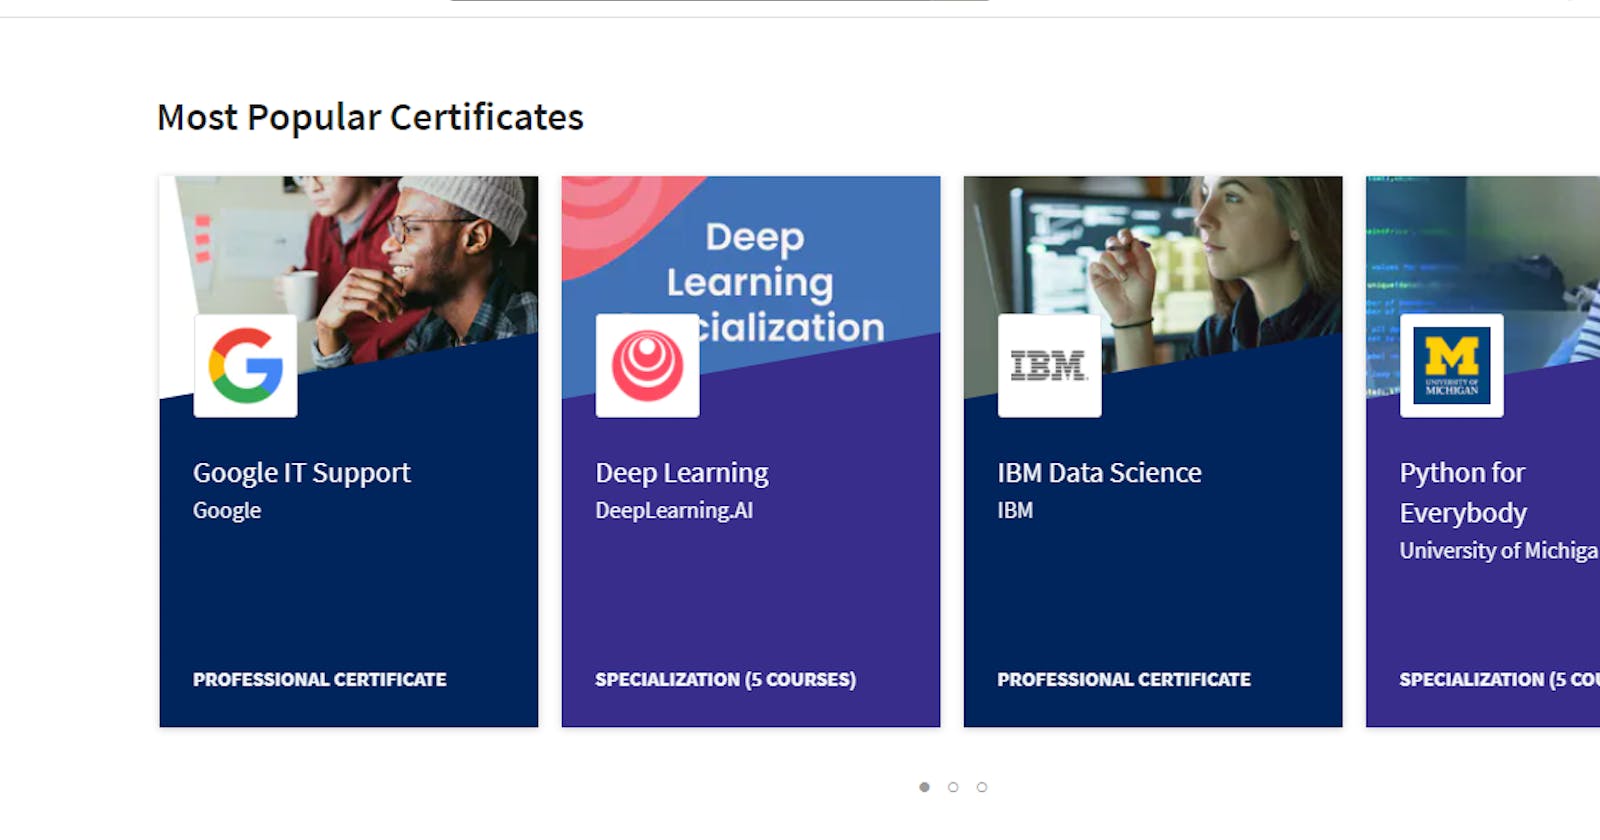 How to get Coursera courses for FREE with Certificate?